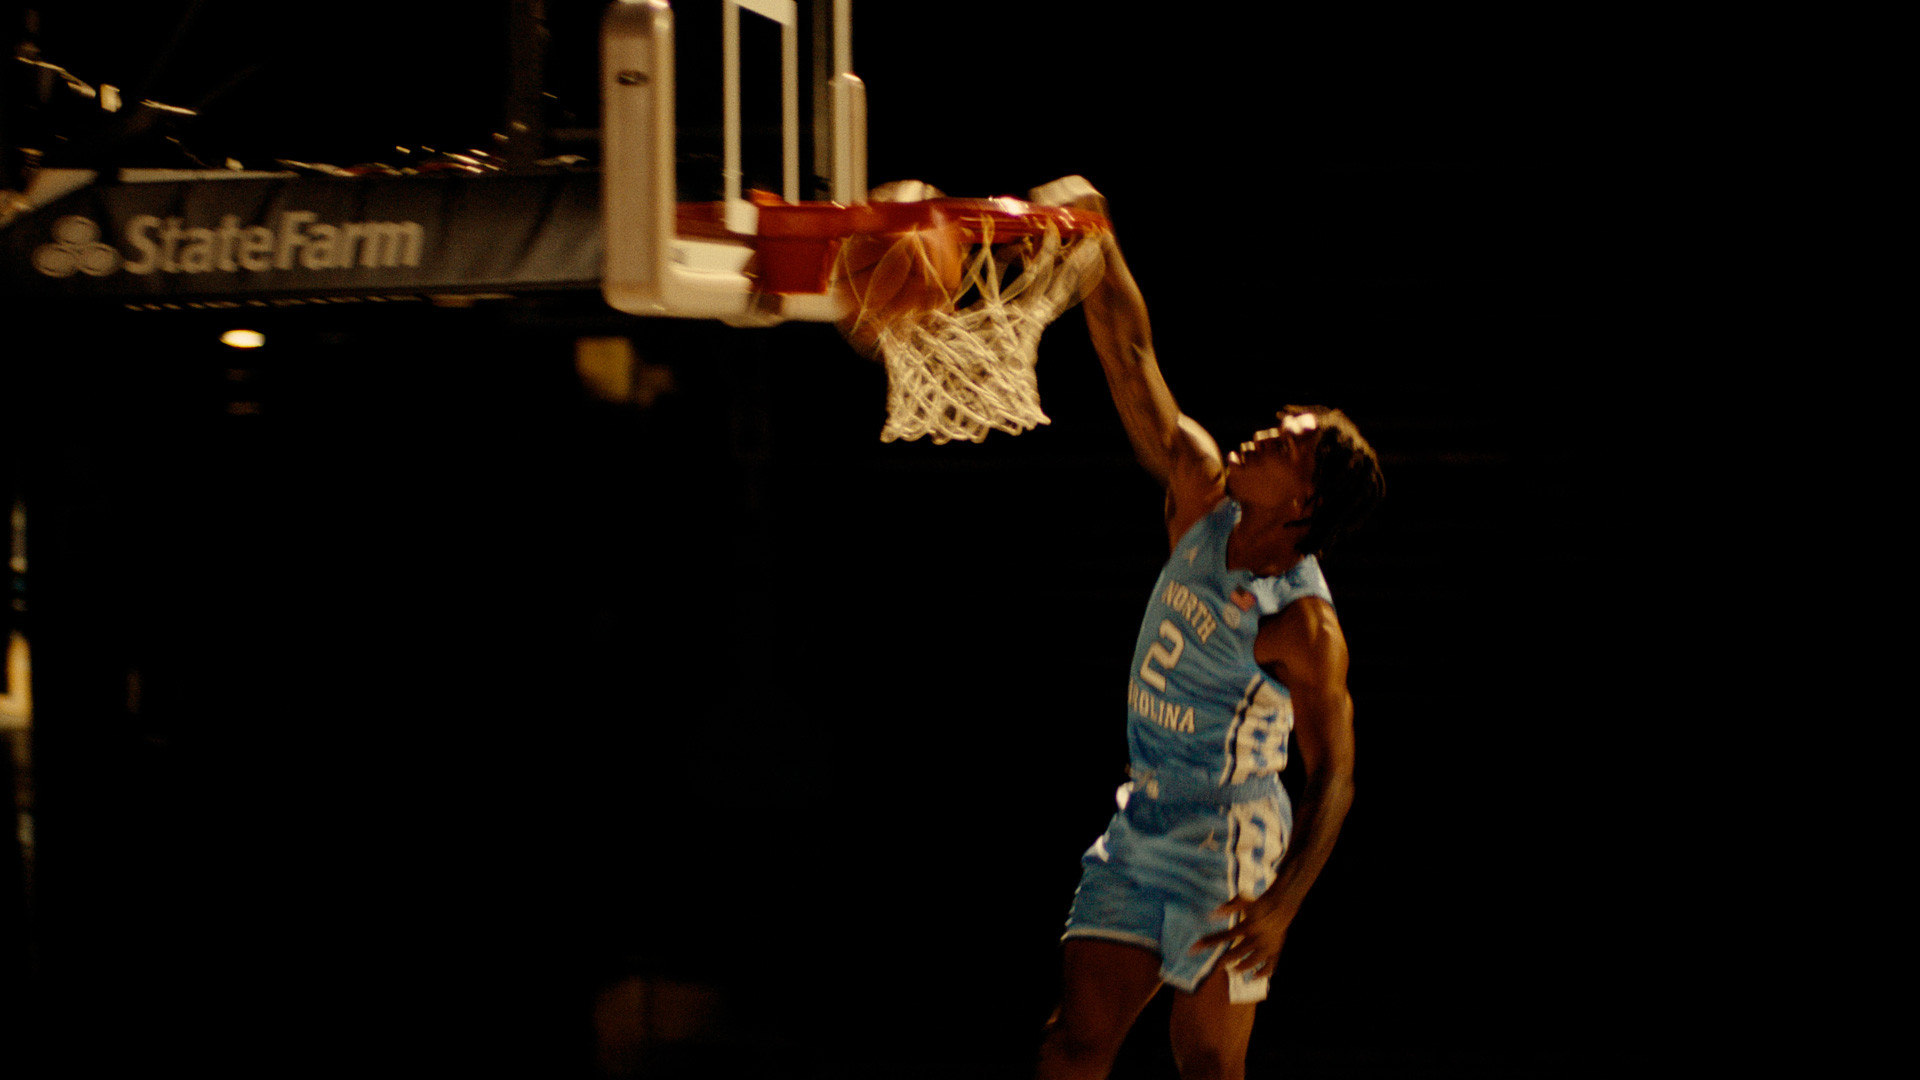 Caleb Love dunking in a UNC jersey